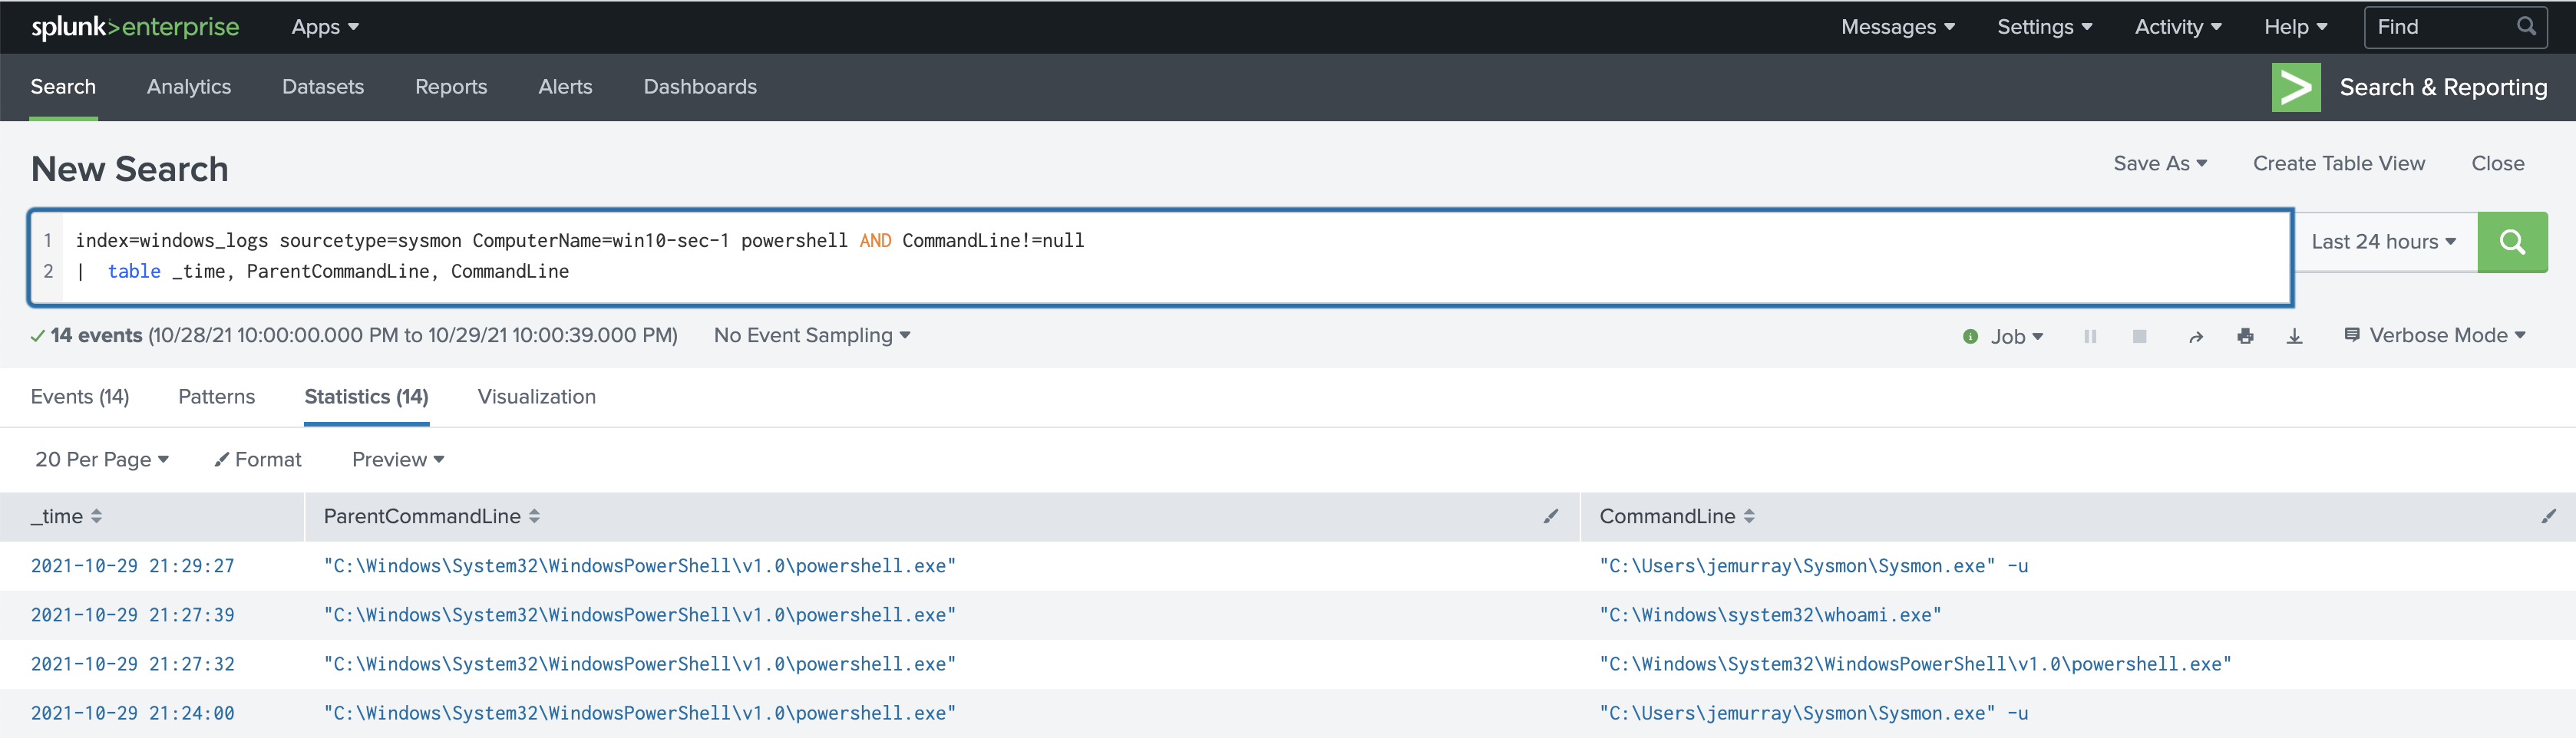 Image of sysmon logging powershell commands into Splunk